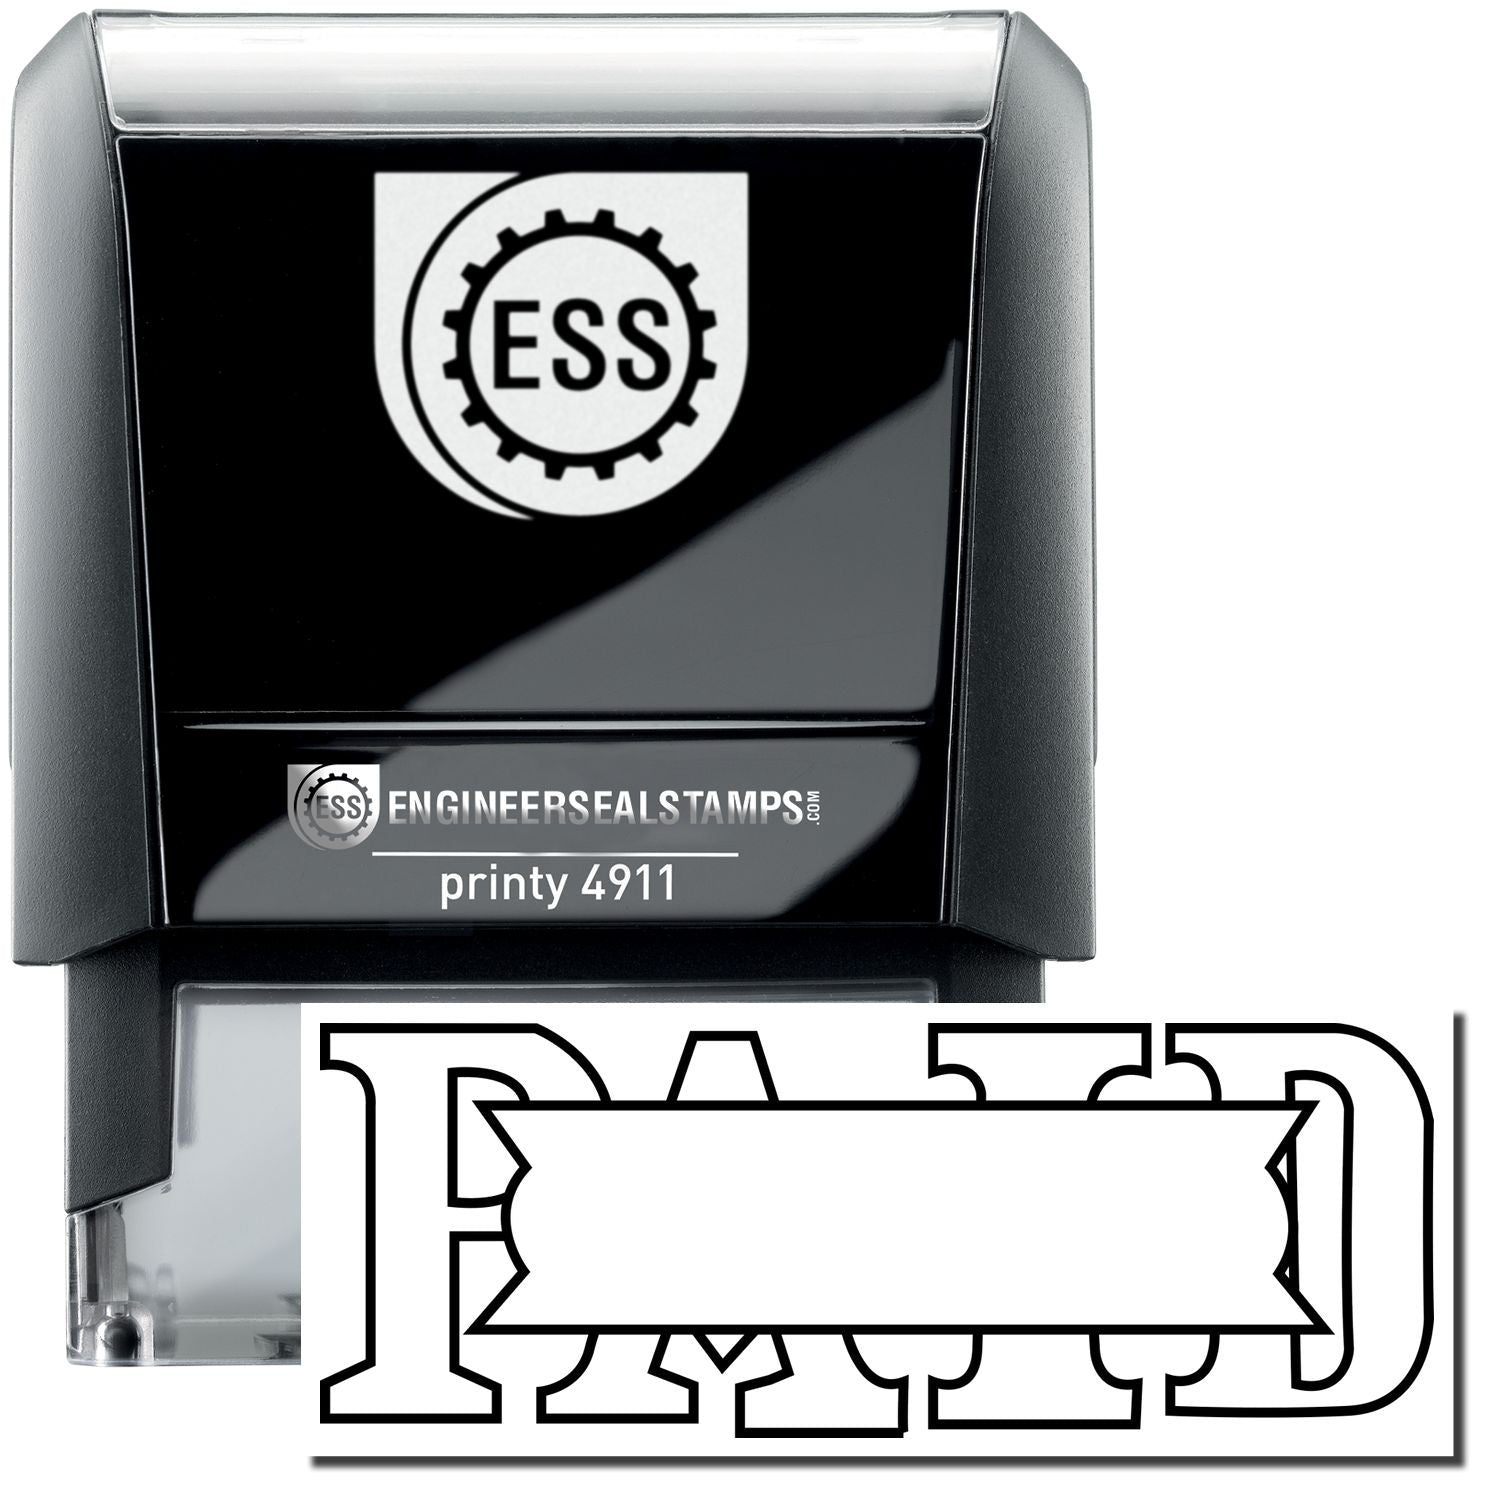 A self-inking stamp with a stamped image showing how the text "PAID" in an outline font with a small box to add a date or time to is displayed after stamping.